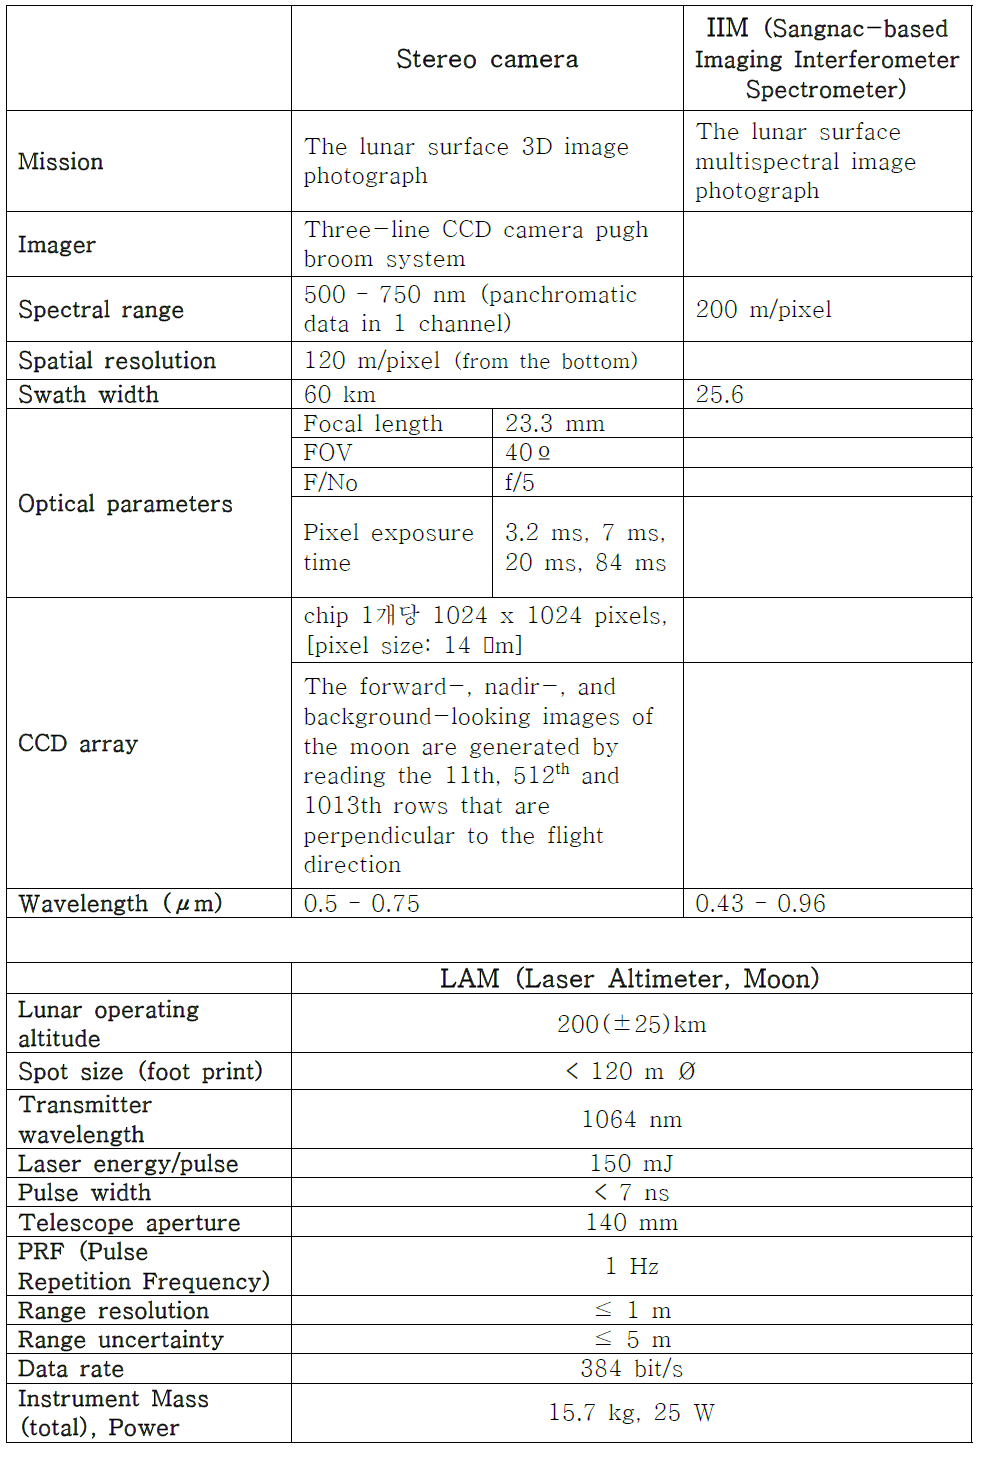 Chang’E-1 Stereo camera specification